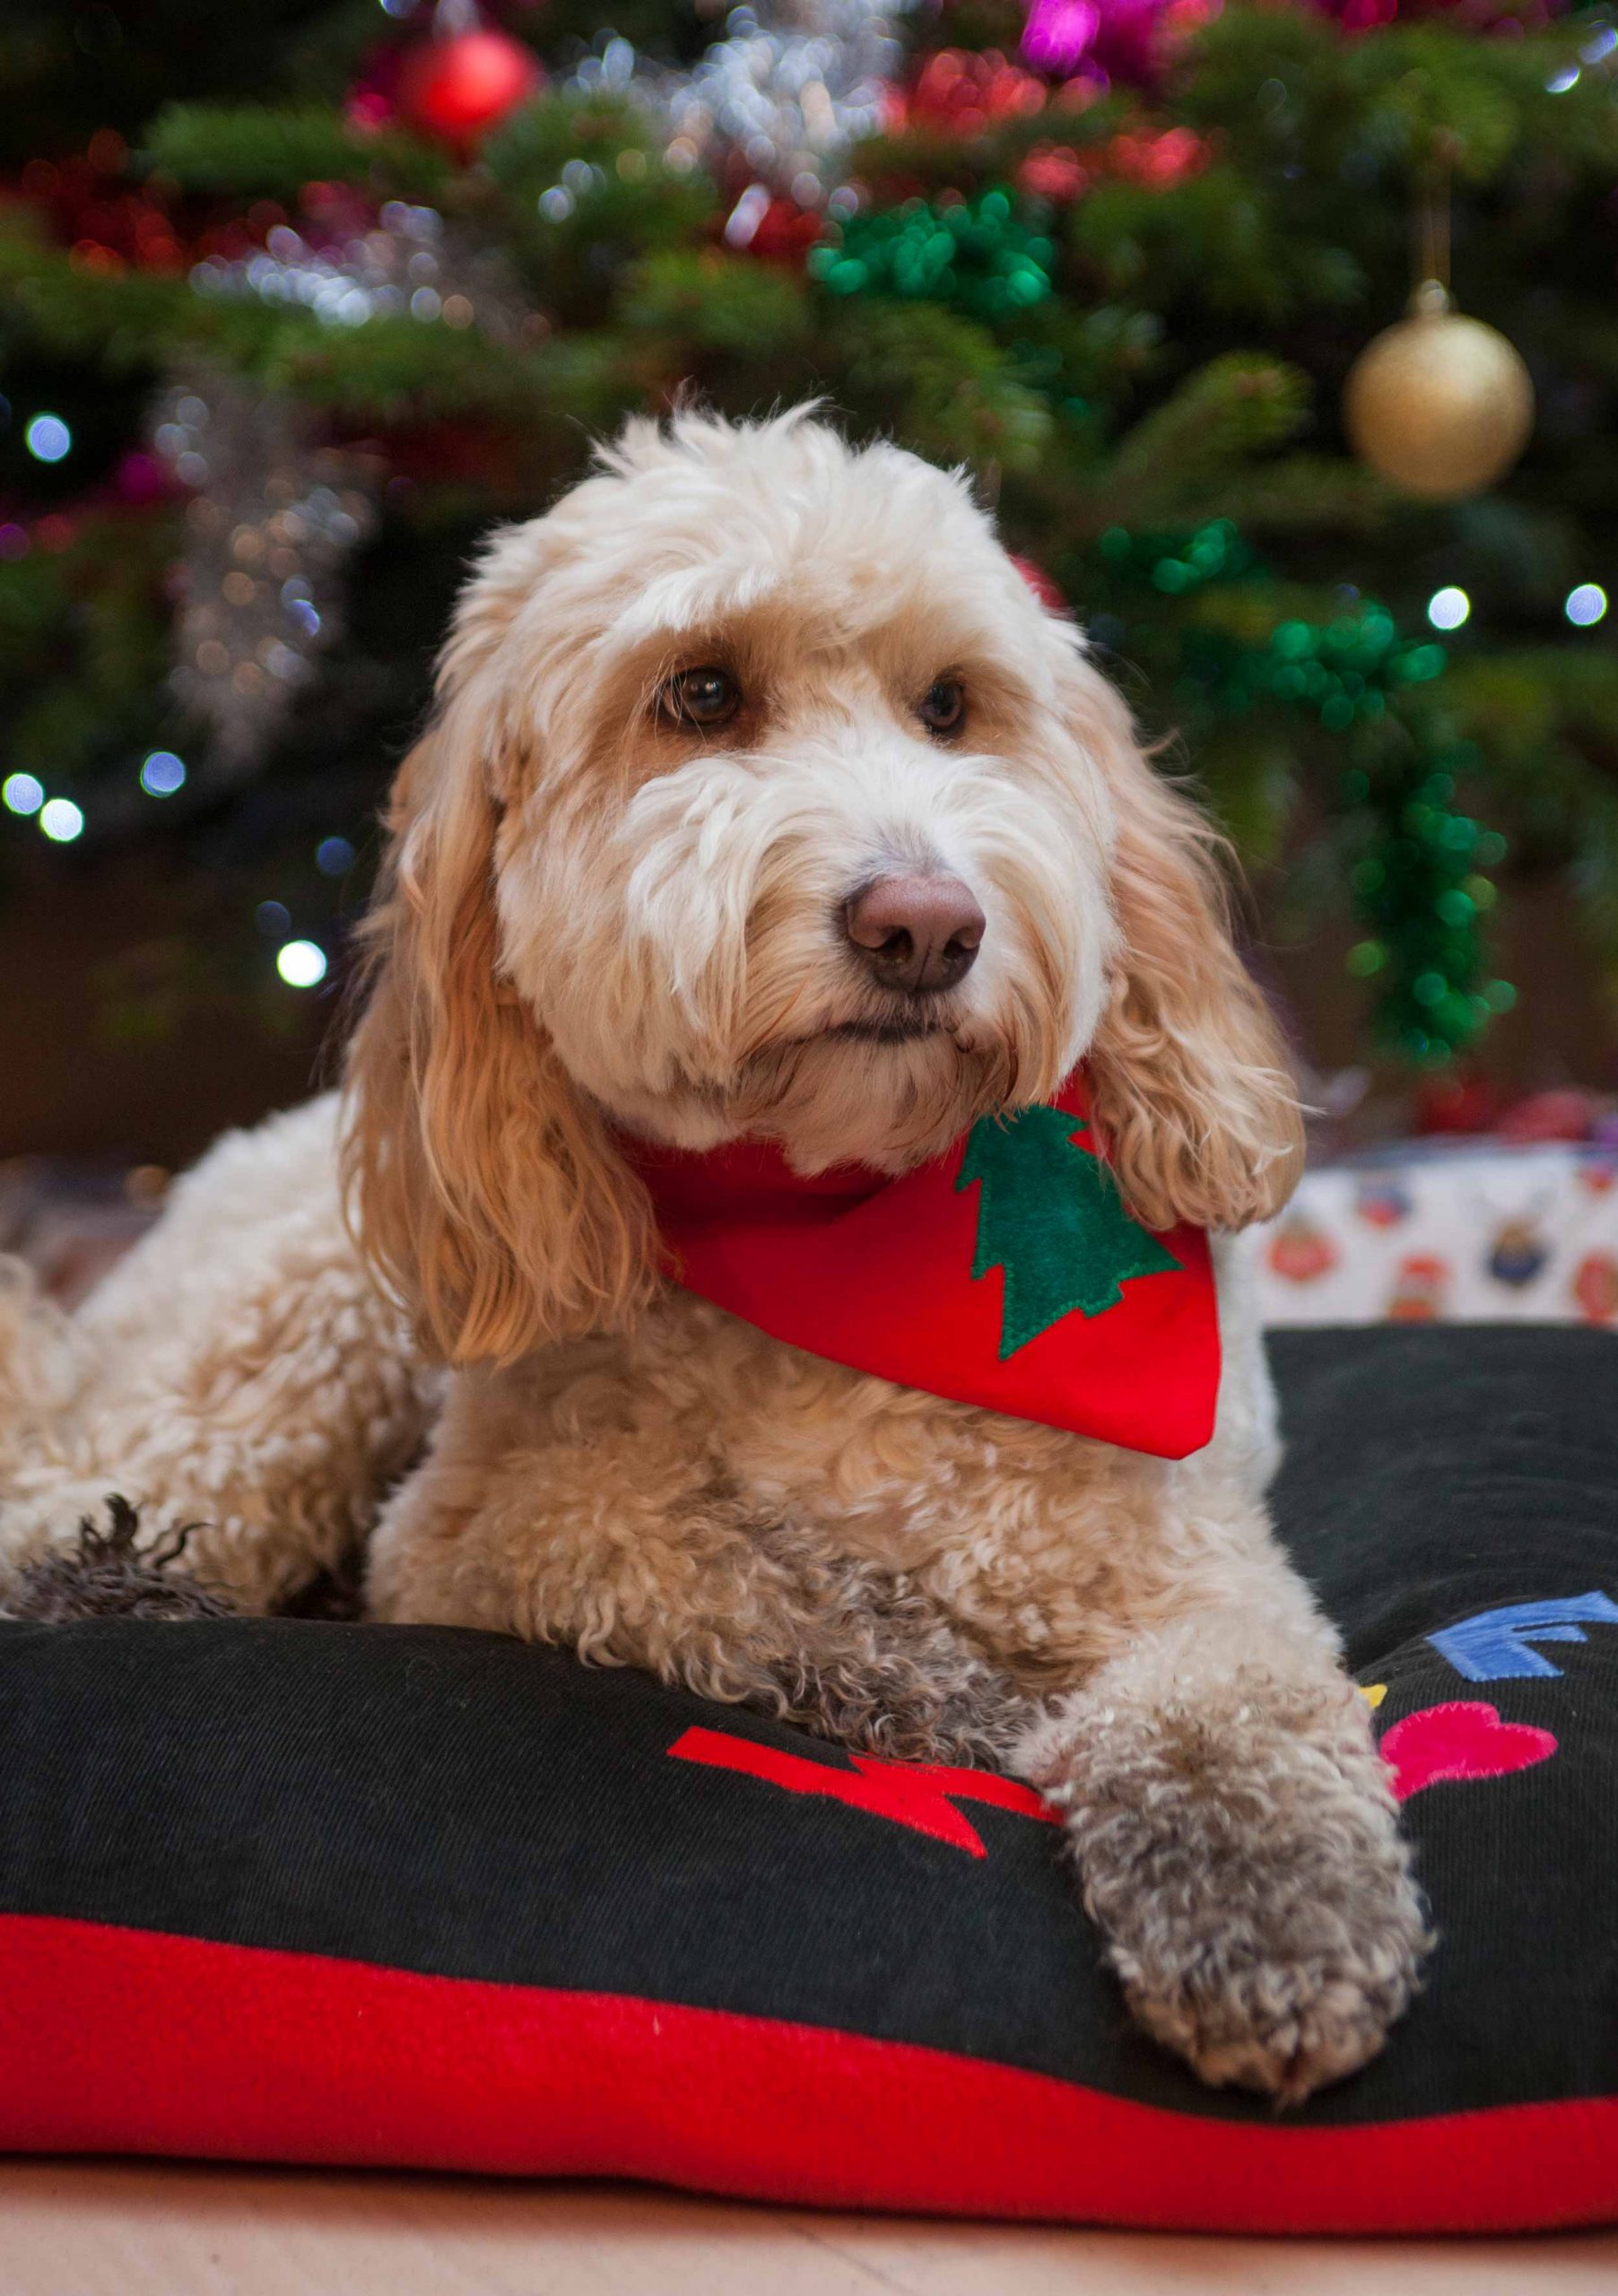 Christmas Gifts for Dogs handmade in the UK by Creature Clothes